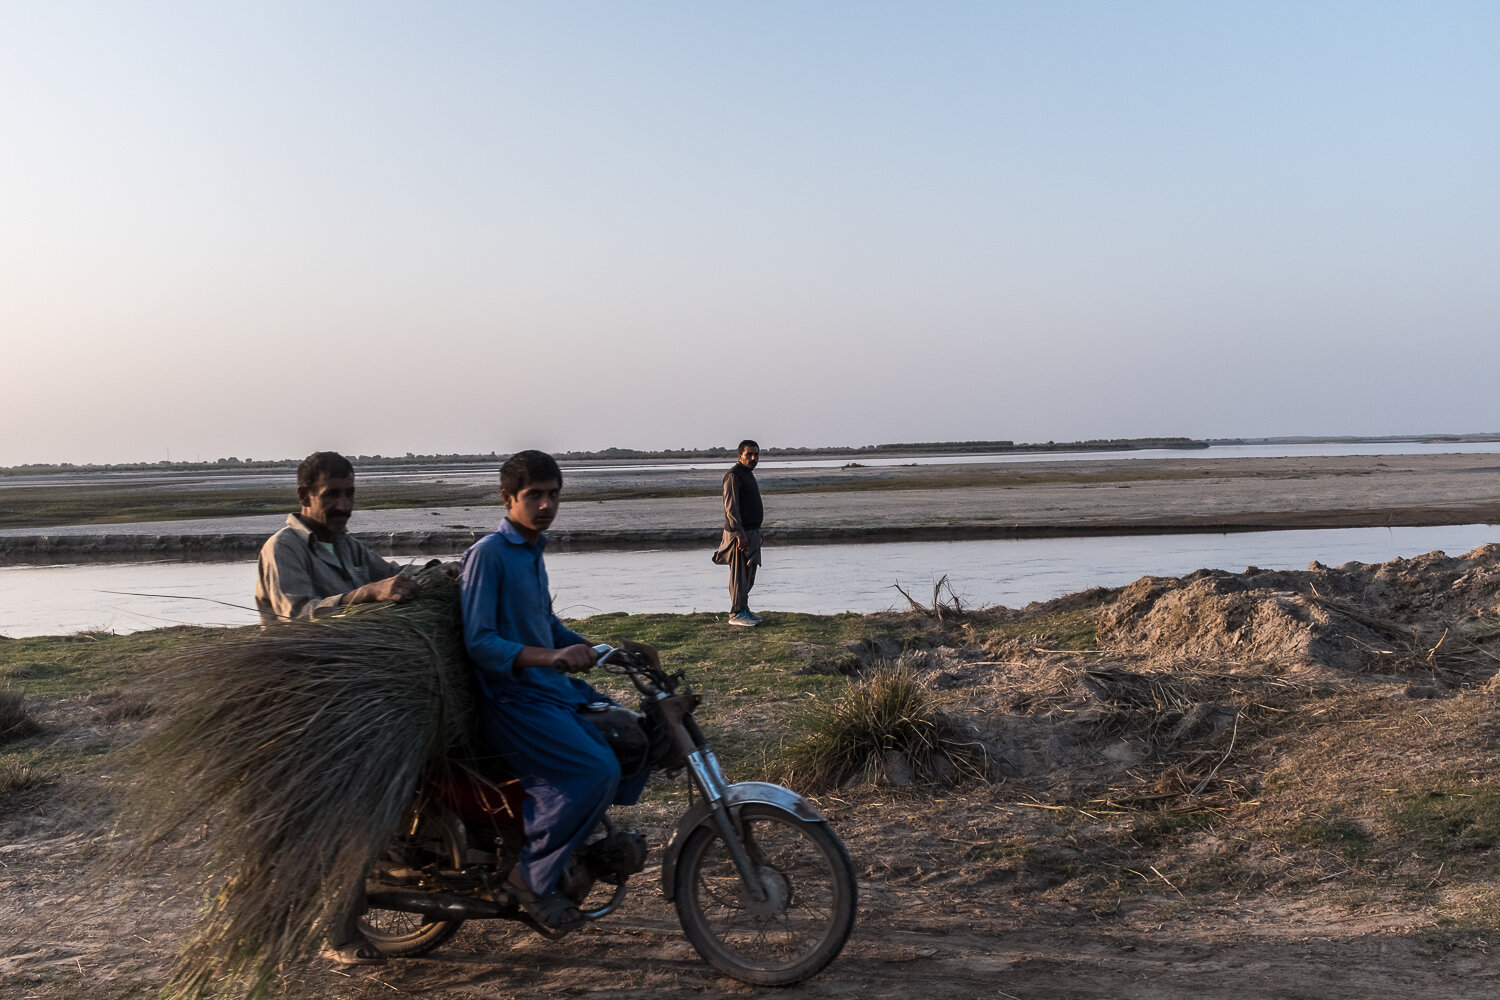  Men along the Chenab River on Saturday, November 18, 2017 in Bosan, Punjab, Pakistan.  The Chenab is one of the main tributaries of the Indus River. 